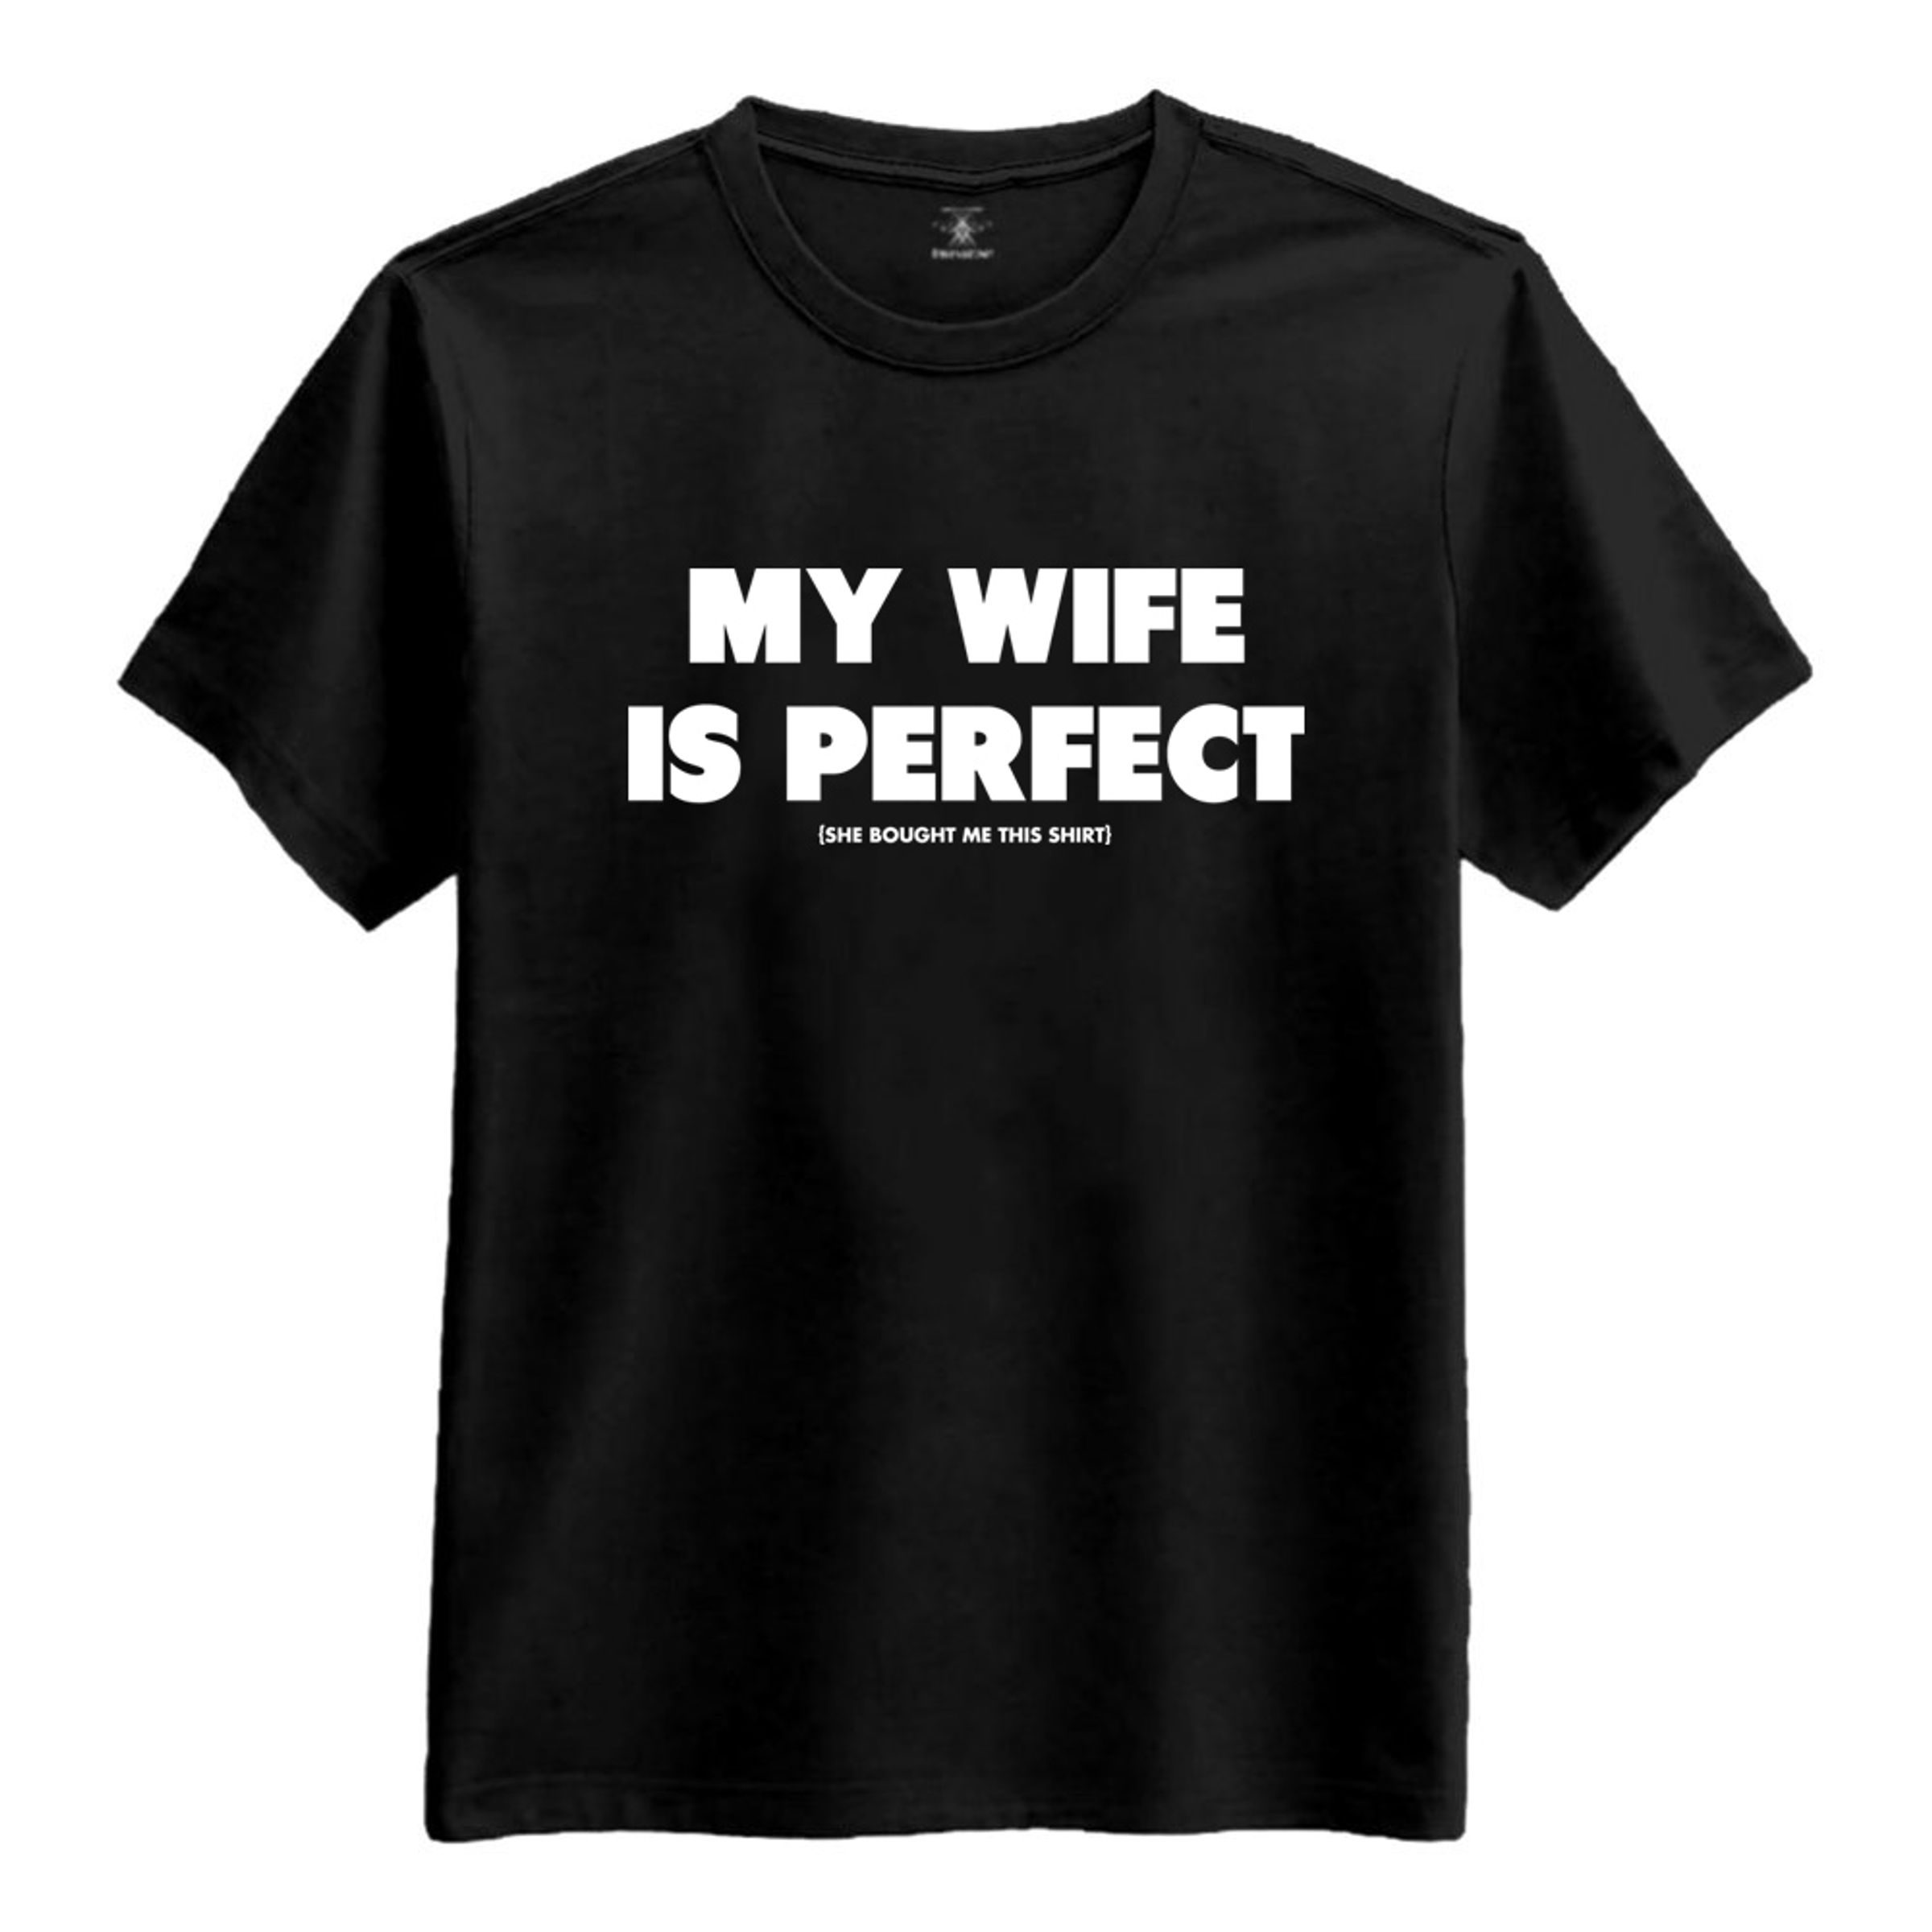 Läs mer om My Wife Is Perfect T-Shirt - Large